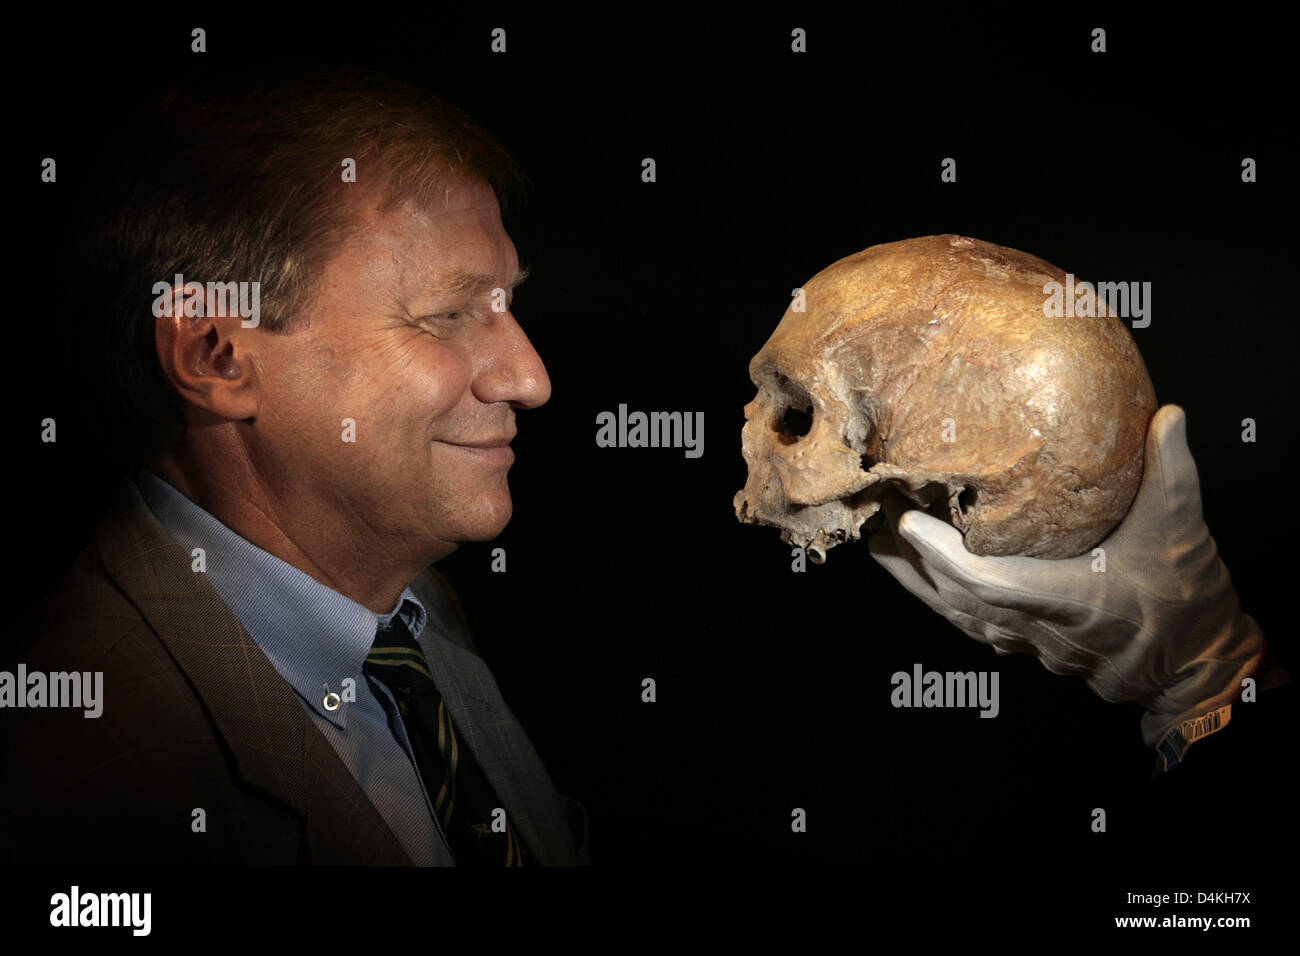 Harry Voigtsberger, director of the LVR state museum poses with a skull of a ice age man in Bonn, Germany, 23 July 2009. Scientists perform computer tomographs, isotope analysis, genetic examination and examine the bones of the skeletons of two 14.000-years-old ice age hunters to learn about diseases, hereditary factors and nutrition behaviour. Photo: DAVID EBENER Stock Photo